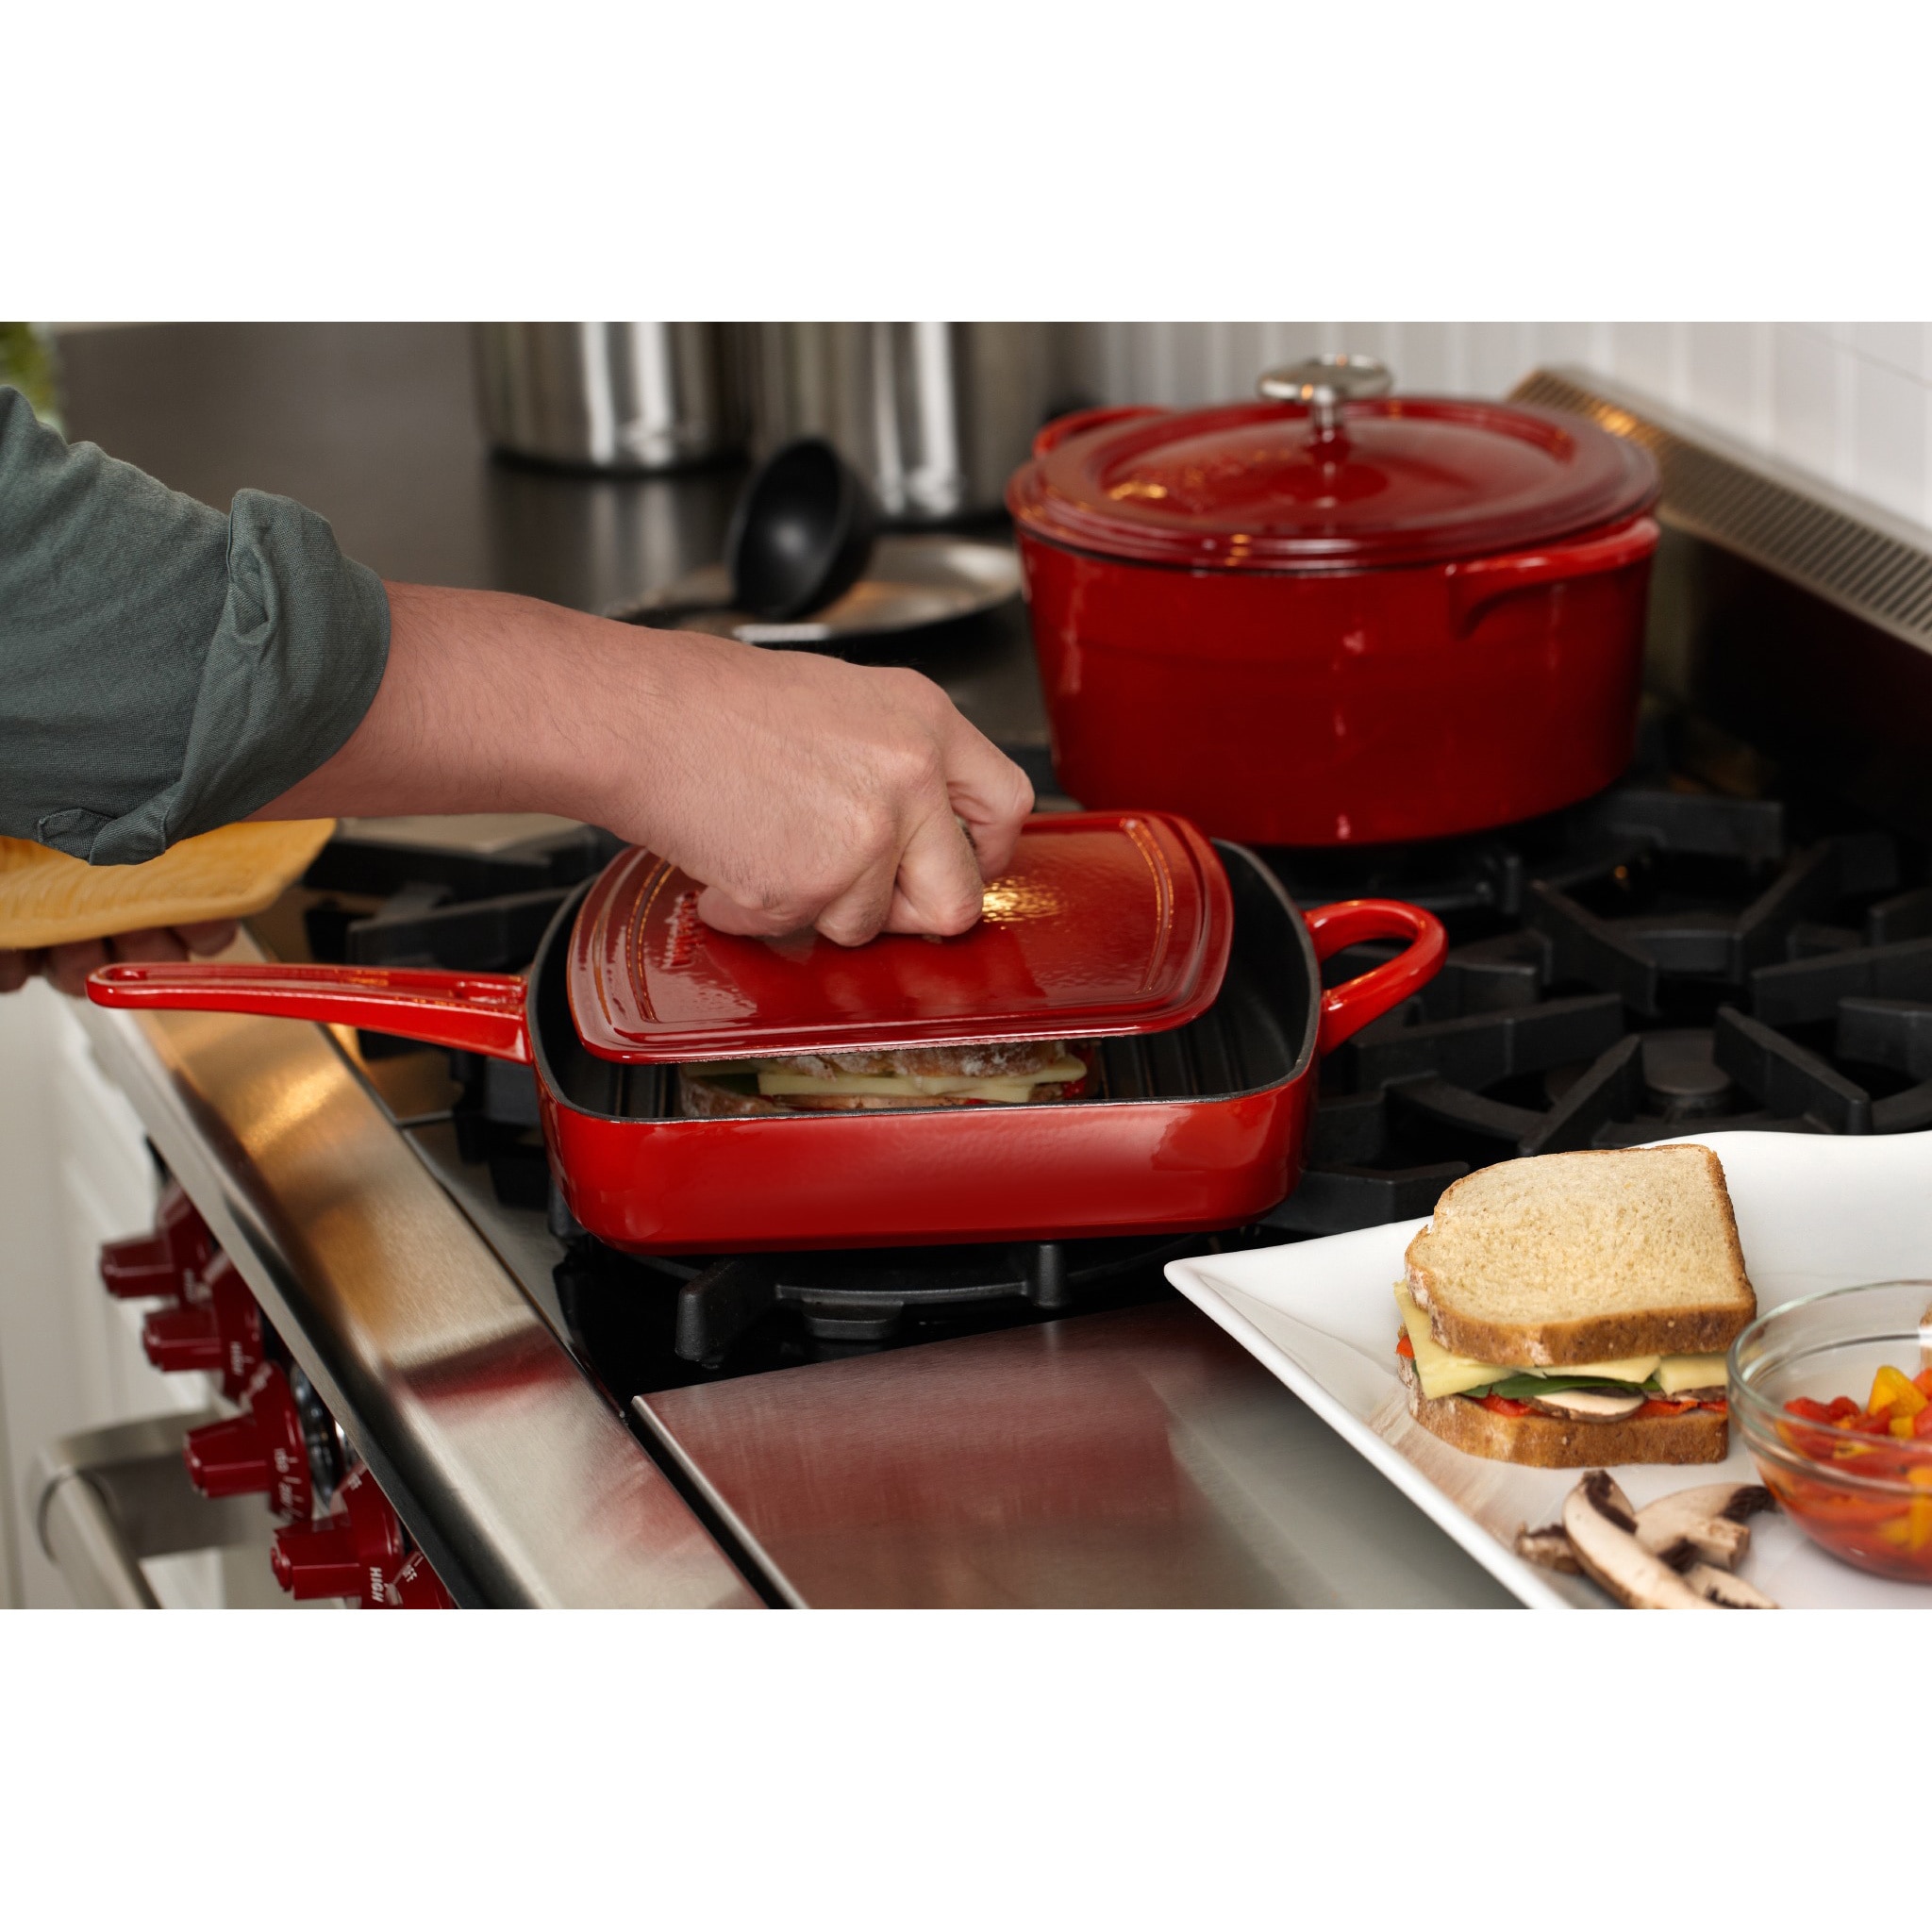 Simply Calphalon Enamel Cast Iron Red 11-inch Grill Pan and Press